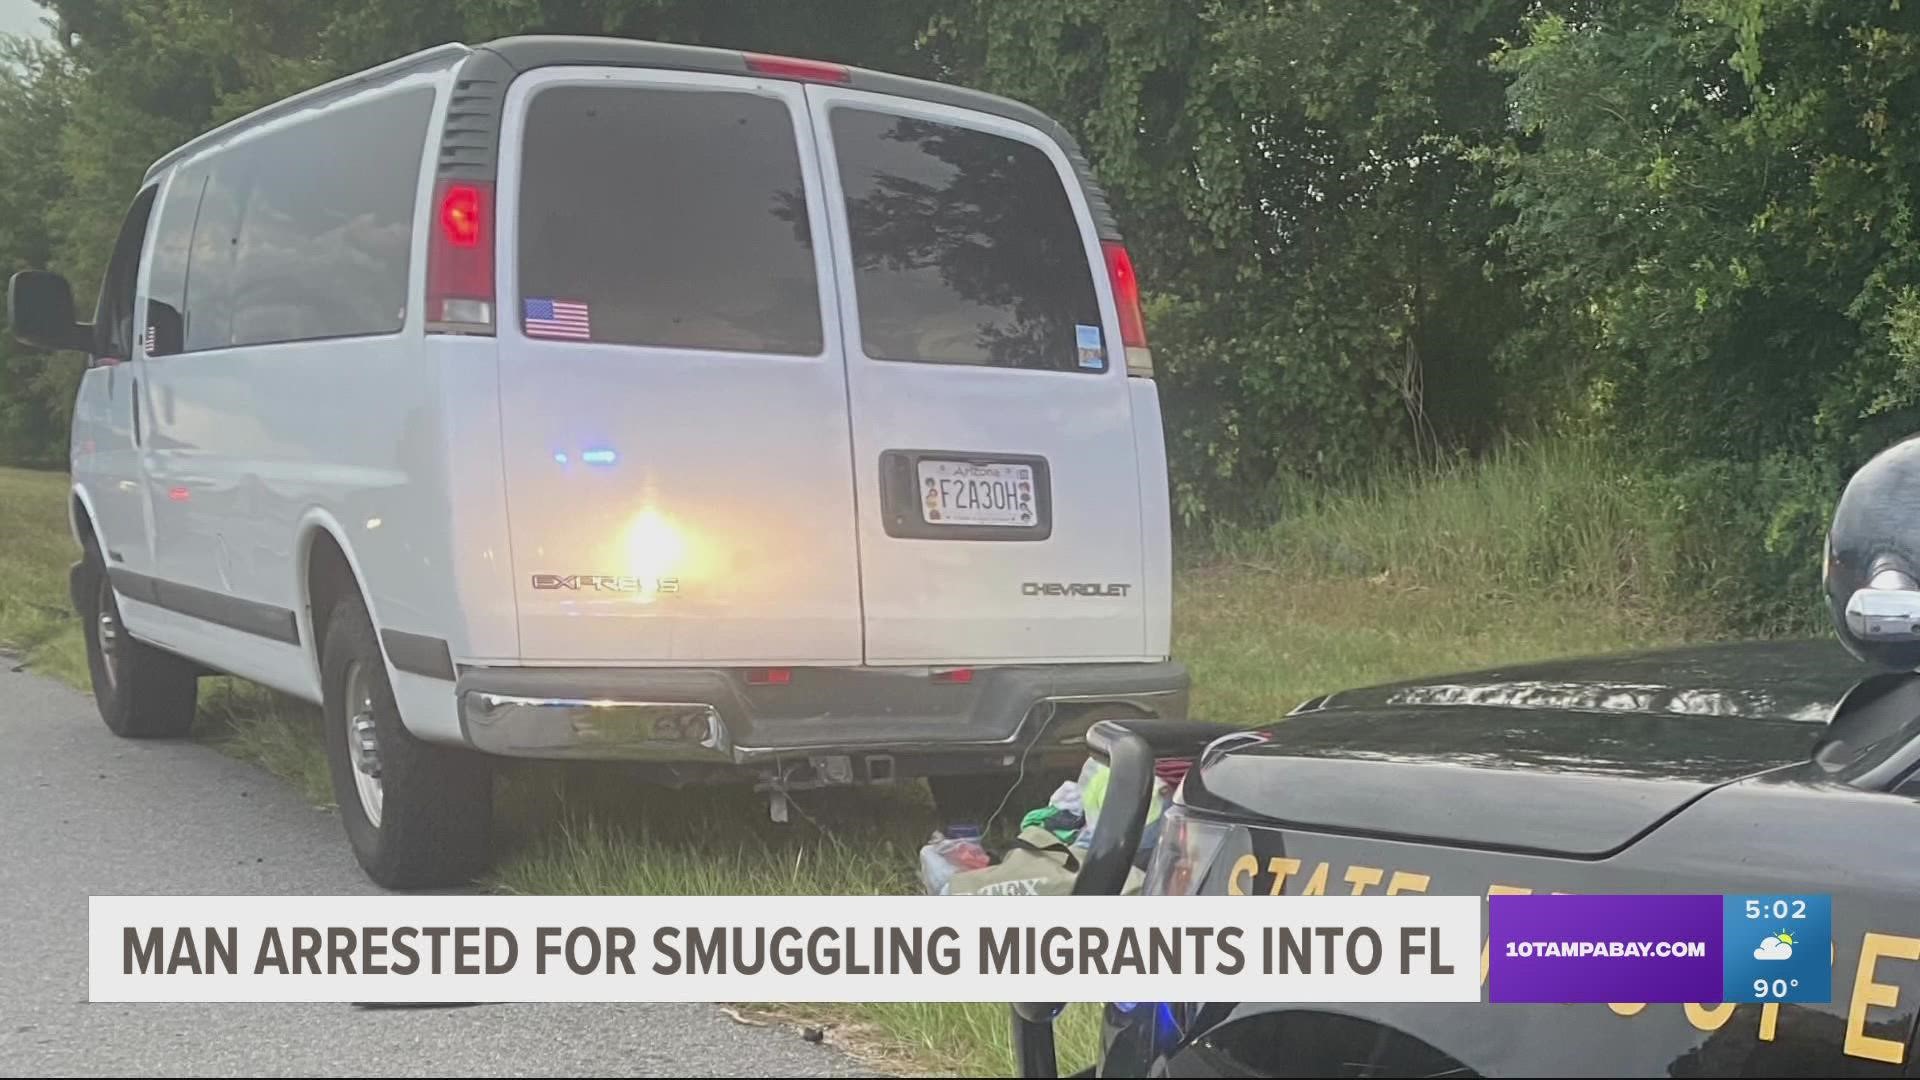 The van was searched and troopers say they found multiple ledgers in the driver's area, including names, destinations and prices.